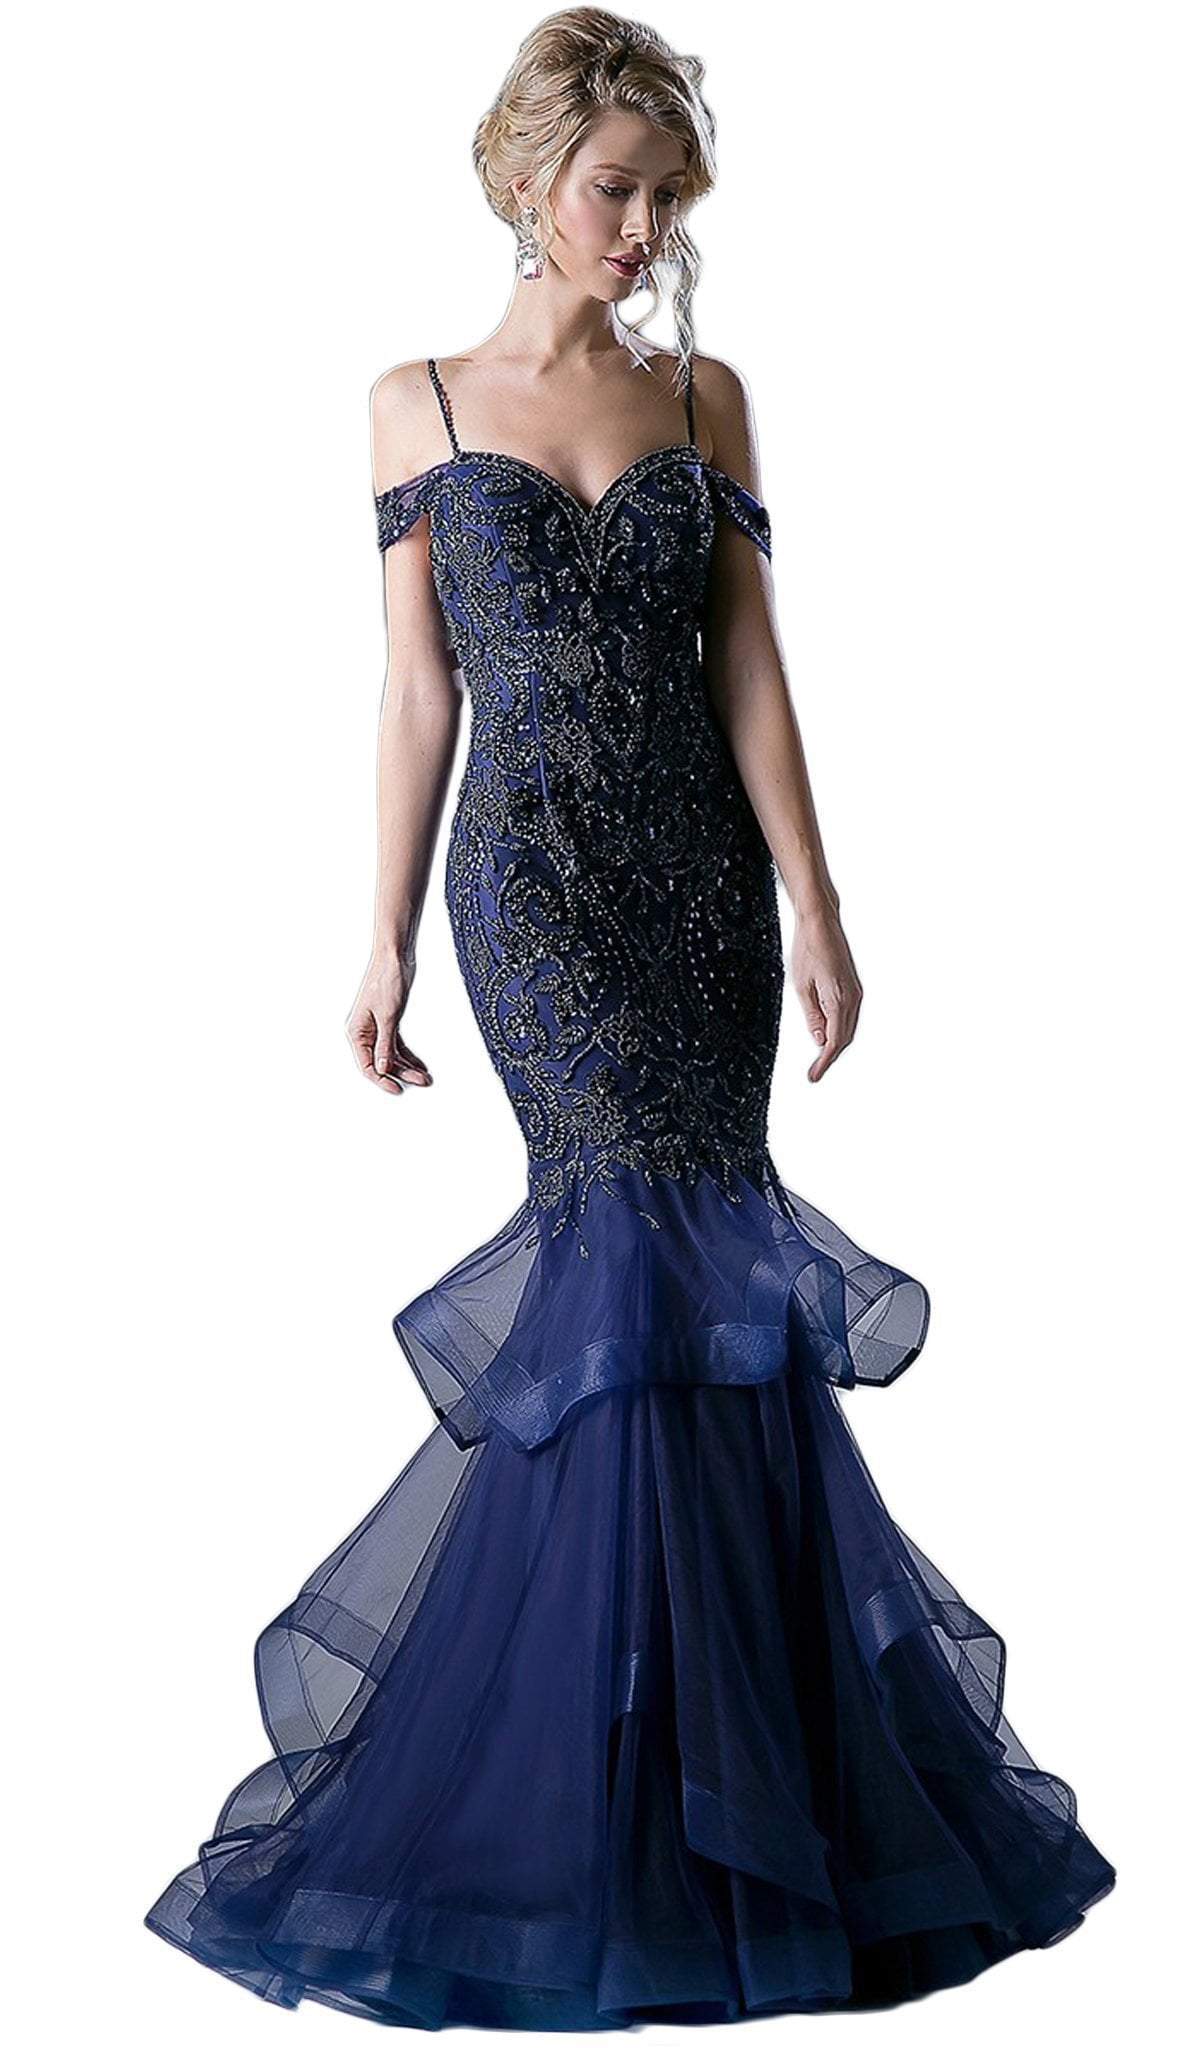 Cinderella Divine - Bead Embellished Ruffled Mermaid Evening Dress Special Occasion Dress 2 / Navy